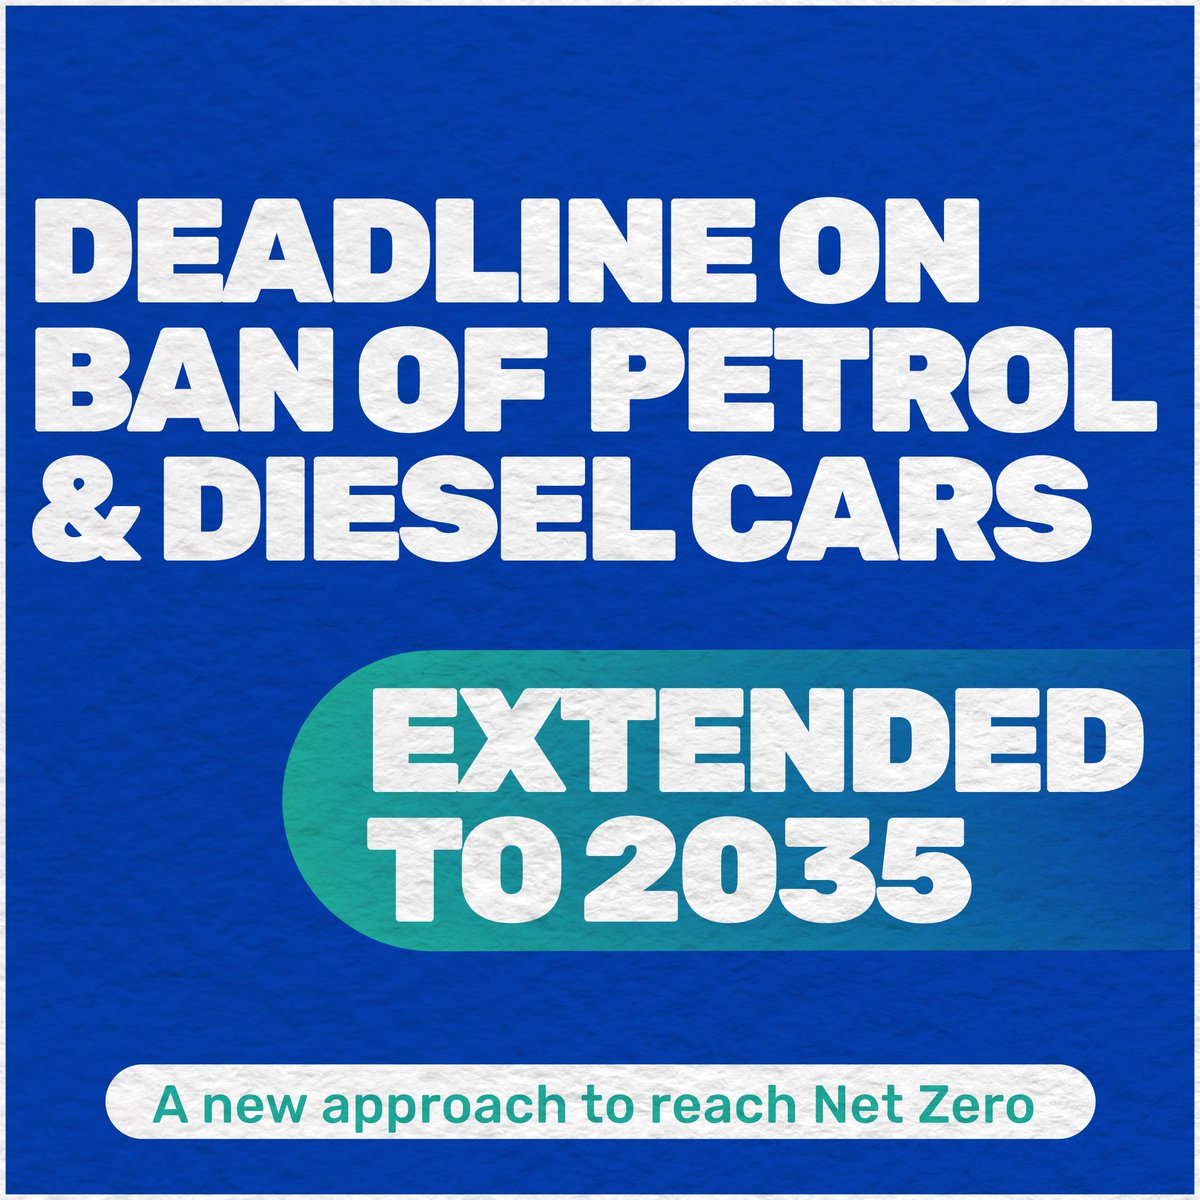 Because the upfront cost for families is still high, and to give us more time to prepare, we’re easing the transition to electric vehicles. That means you’ll still be able to buy new petrol and diesel cars and vans until 2035, in line with countries like Germany and France.